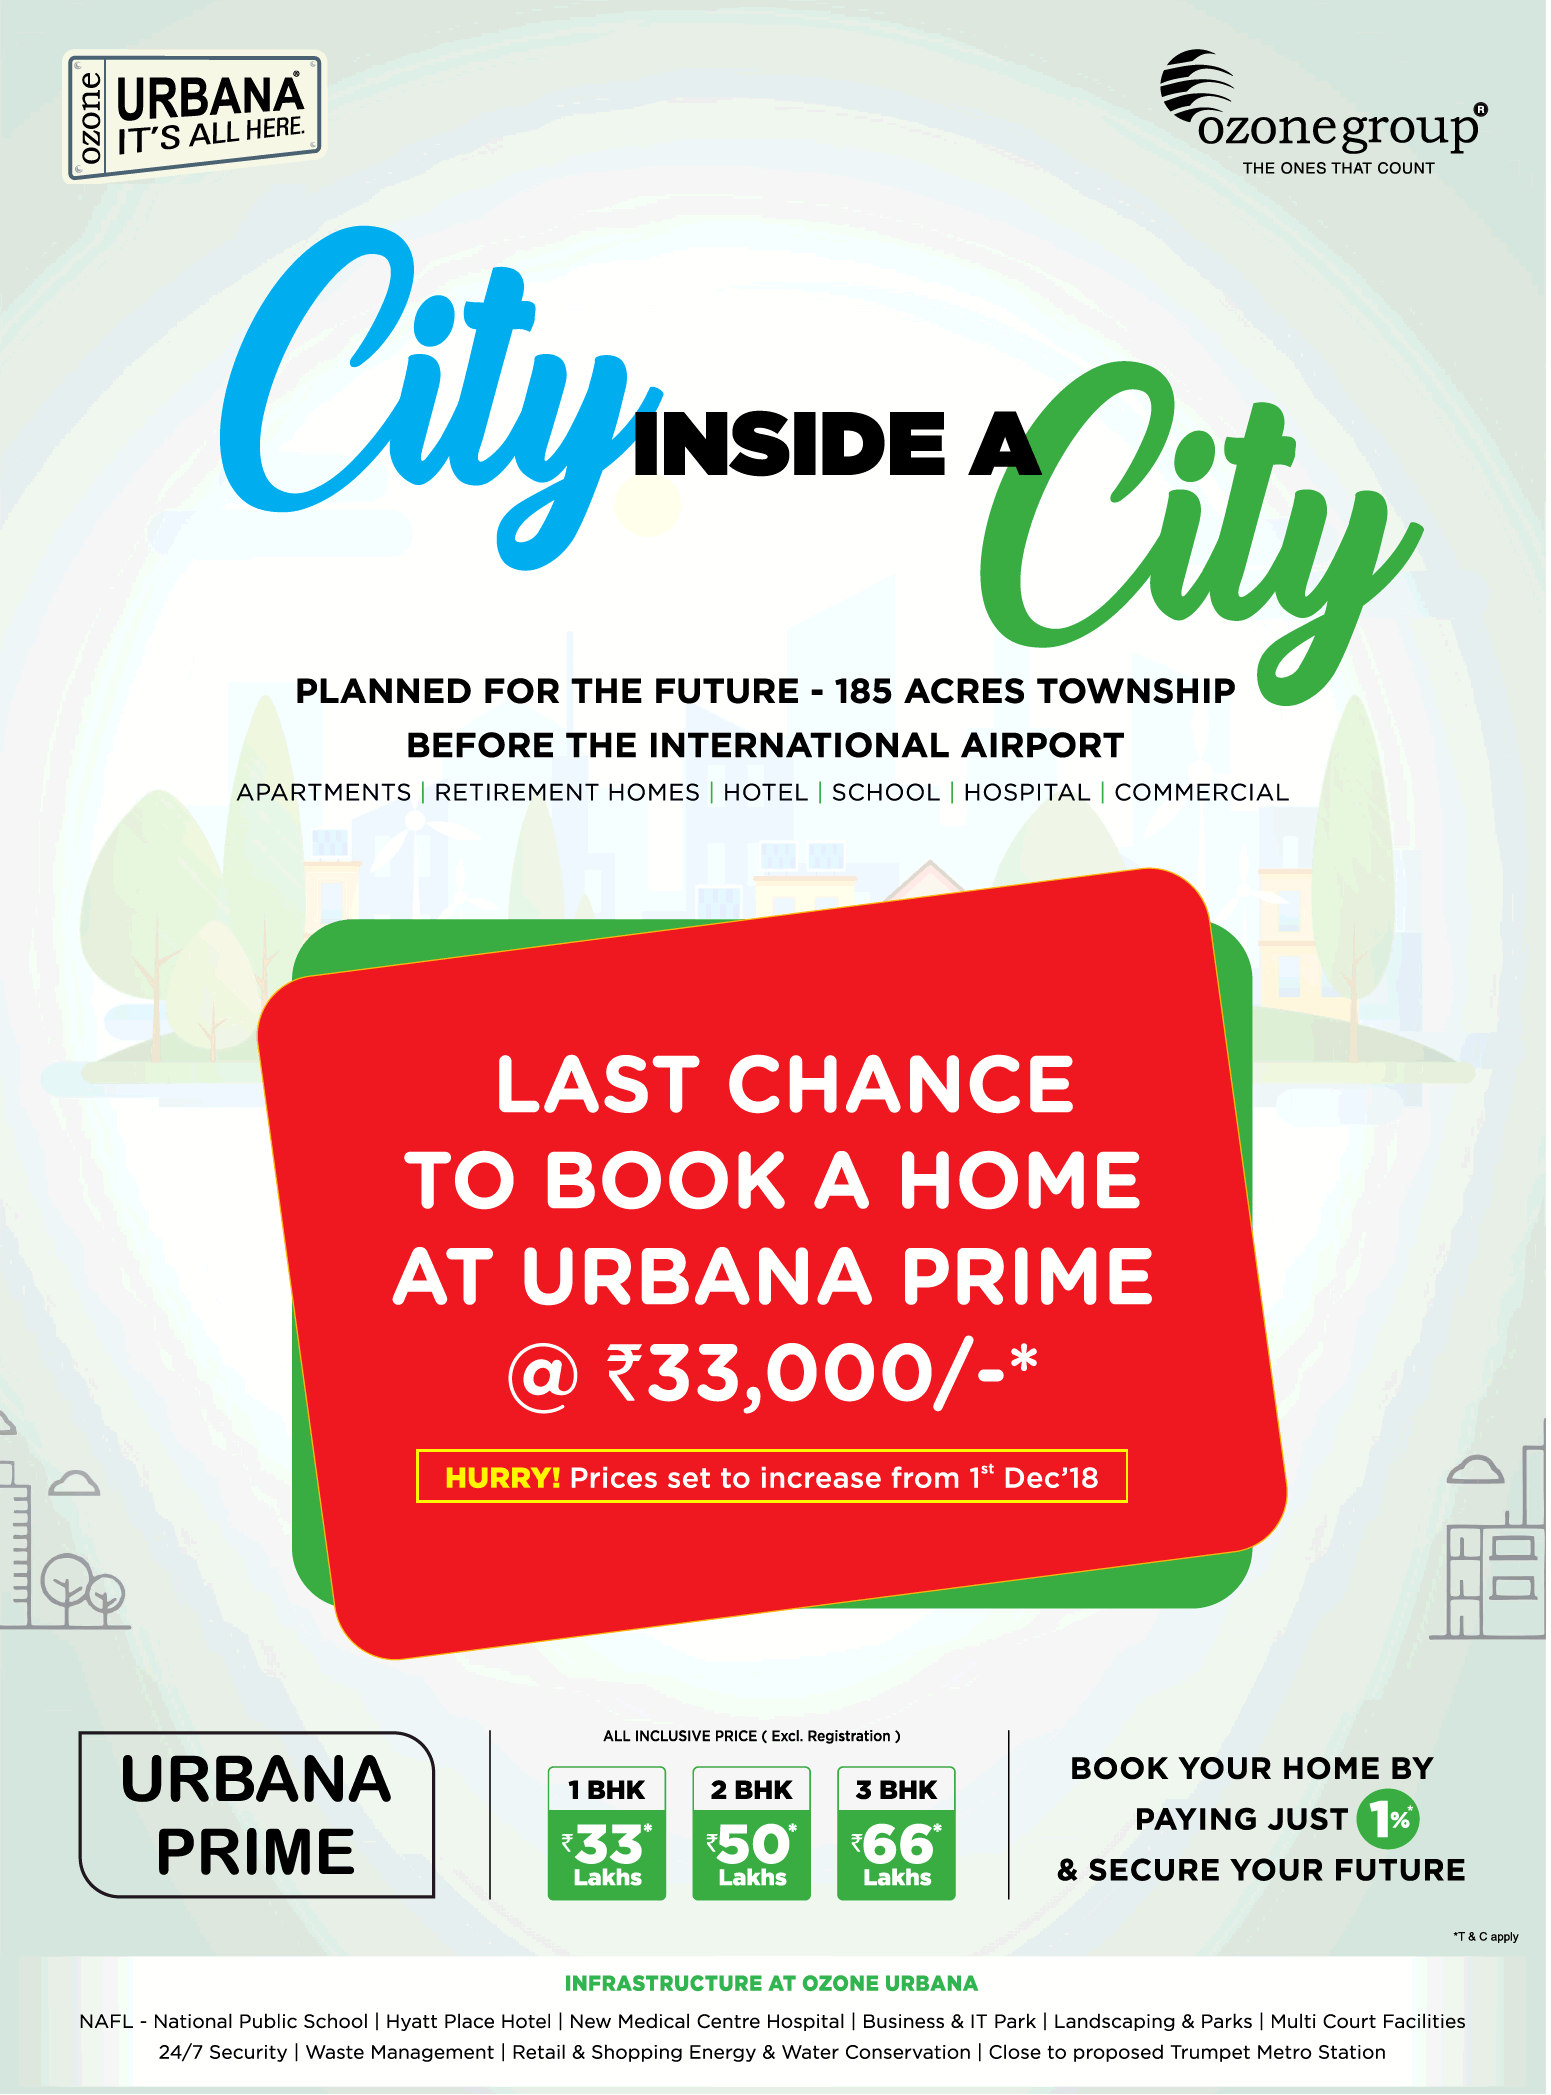 Last chance to book a home @ Rs.33000 at Ozone Urbana Prime in Bangalore